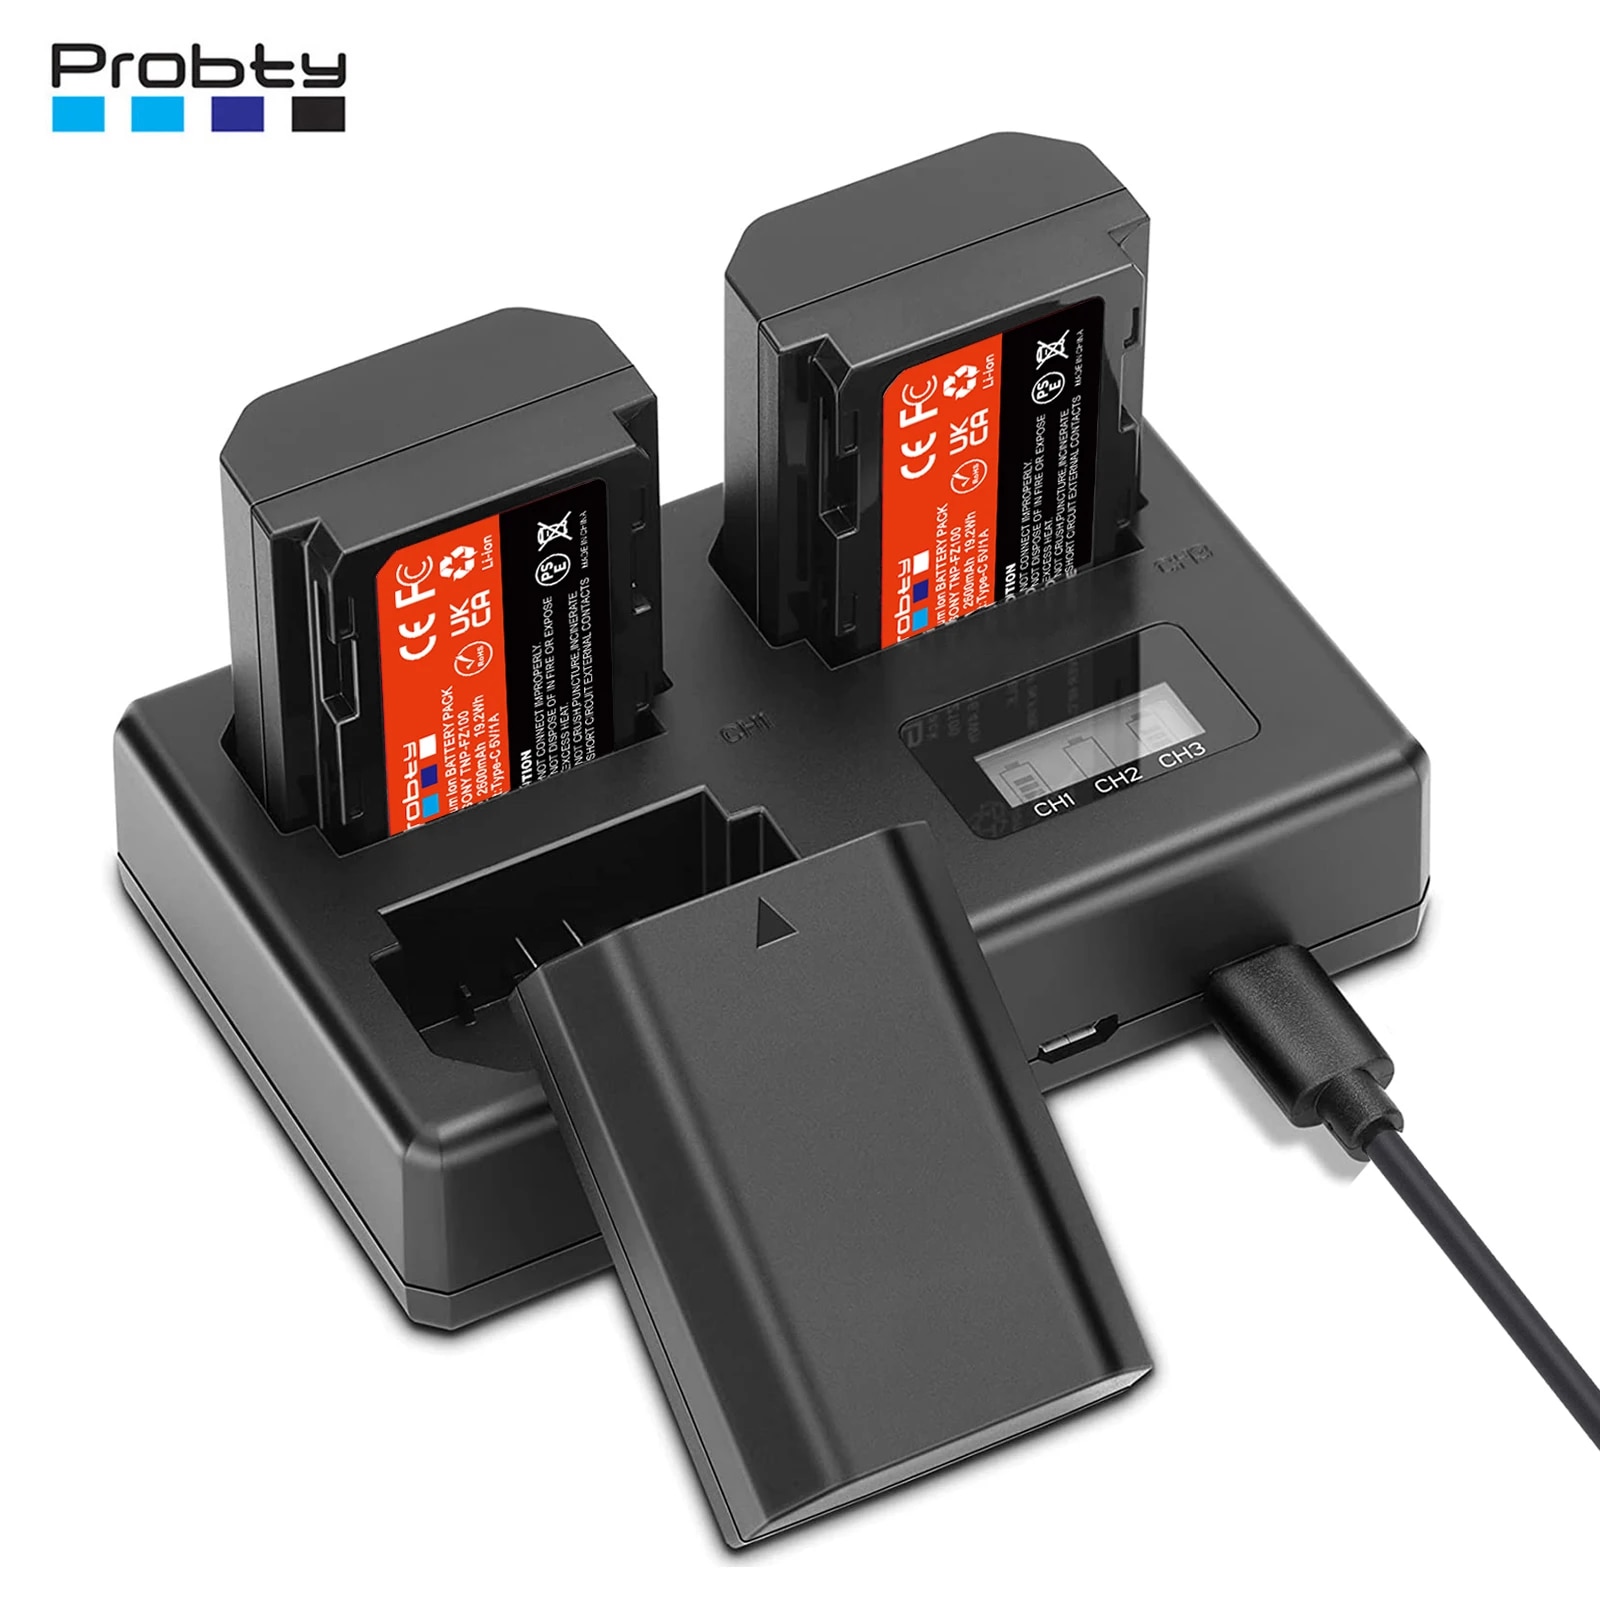 【Free-delivery】 Np-Fz100 Npfz100 Np Fz100 Lcd Three Channel Charger For 1 Zv-E1 Fx3 Fx30 A7c A7s Iii A6600 A6700